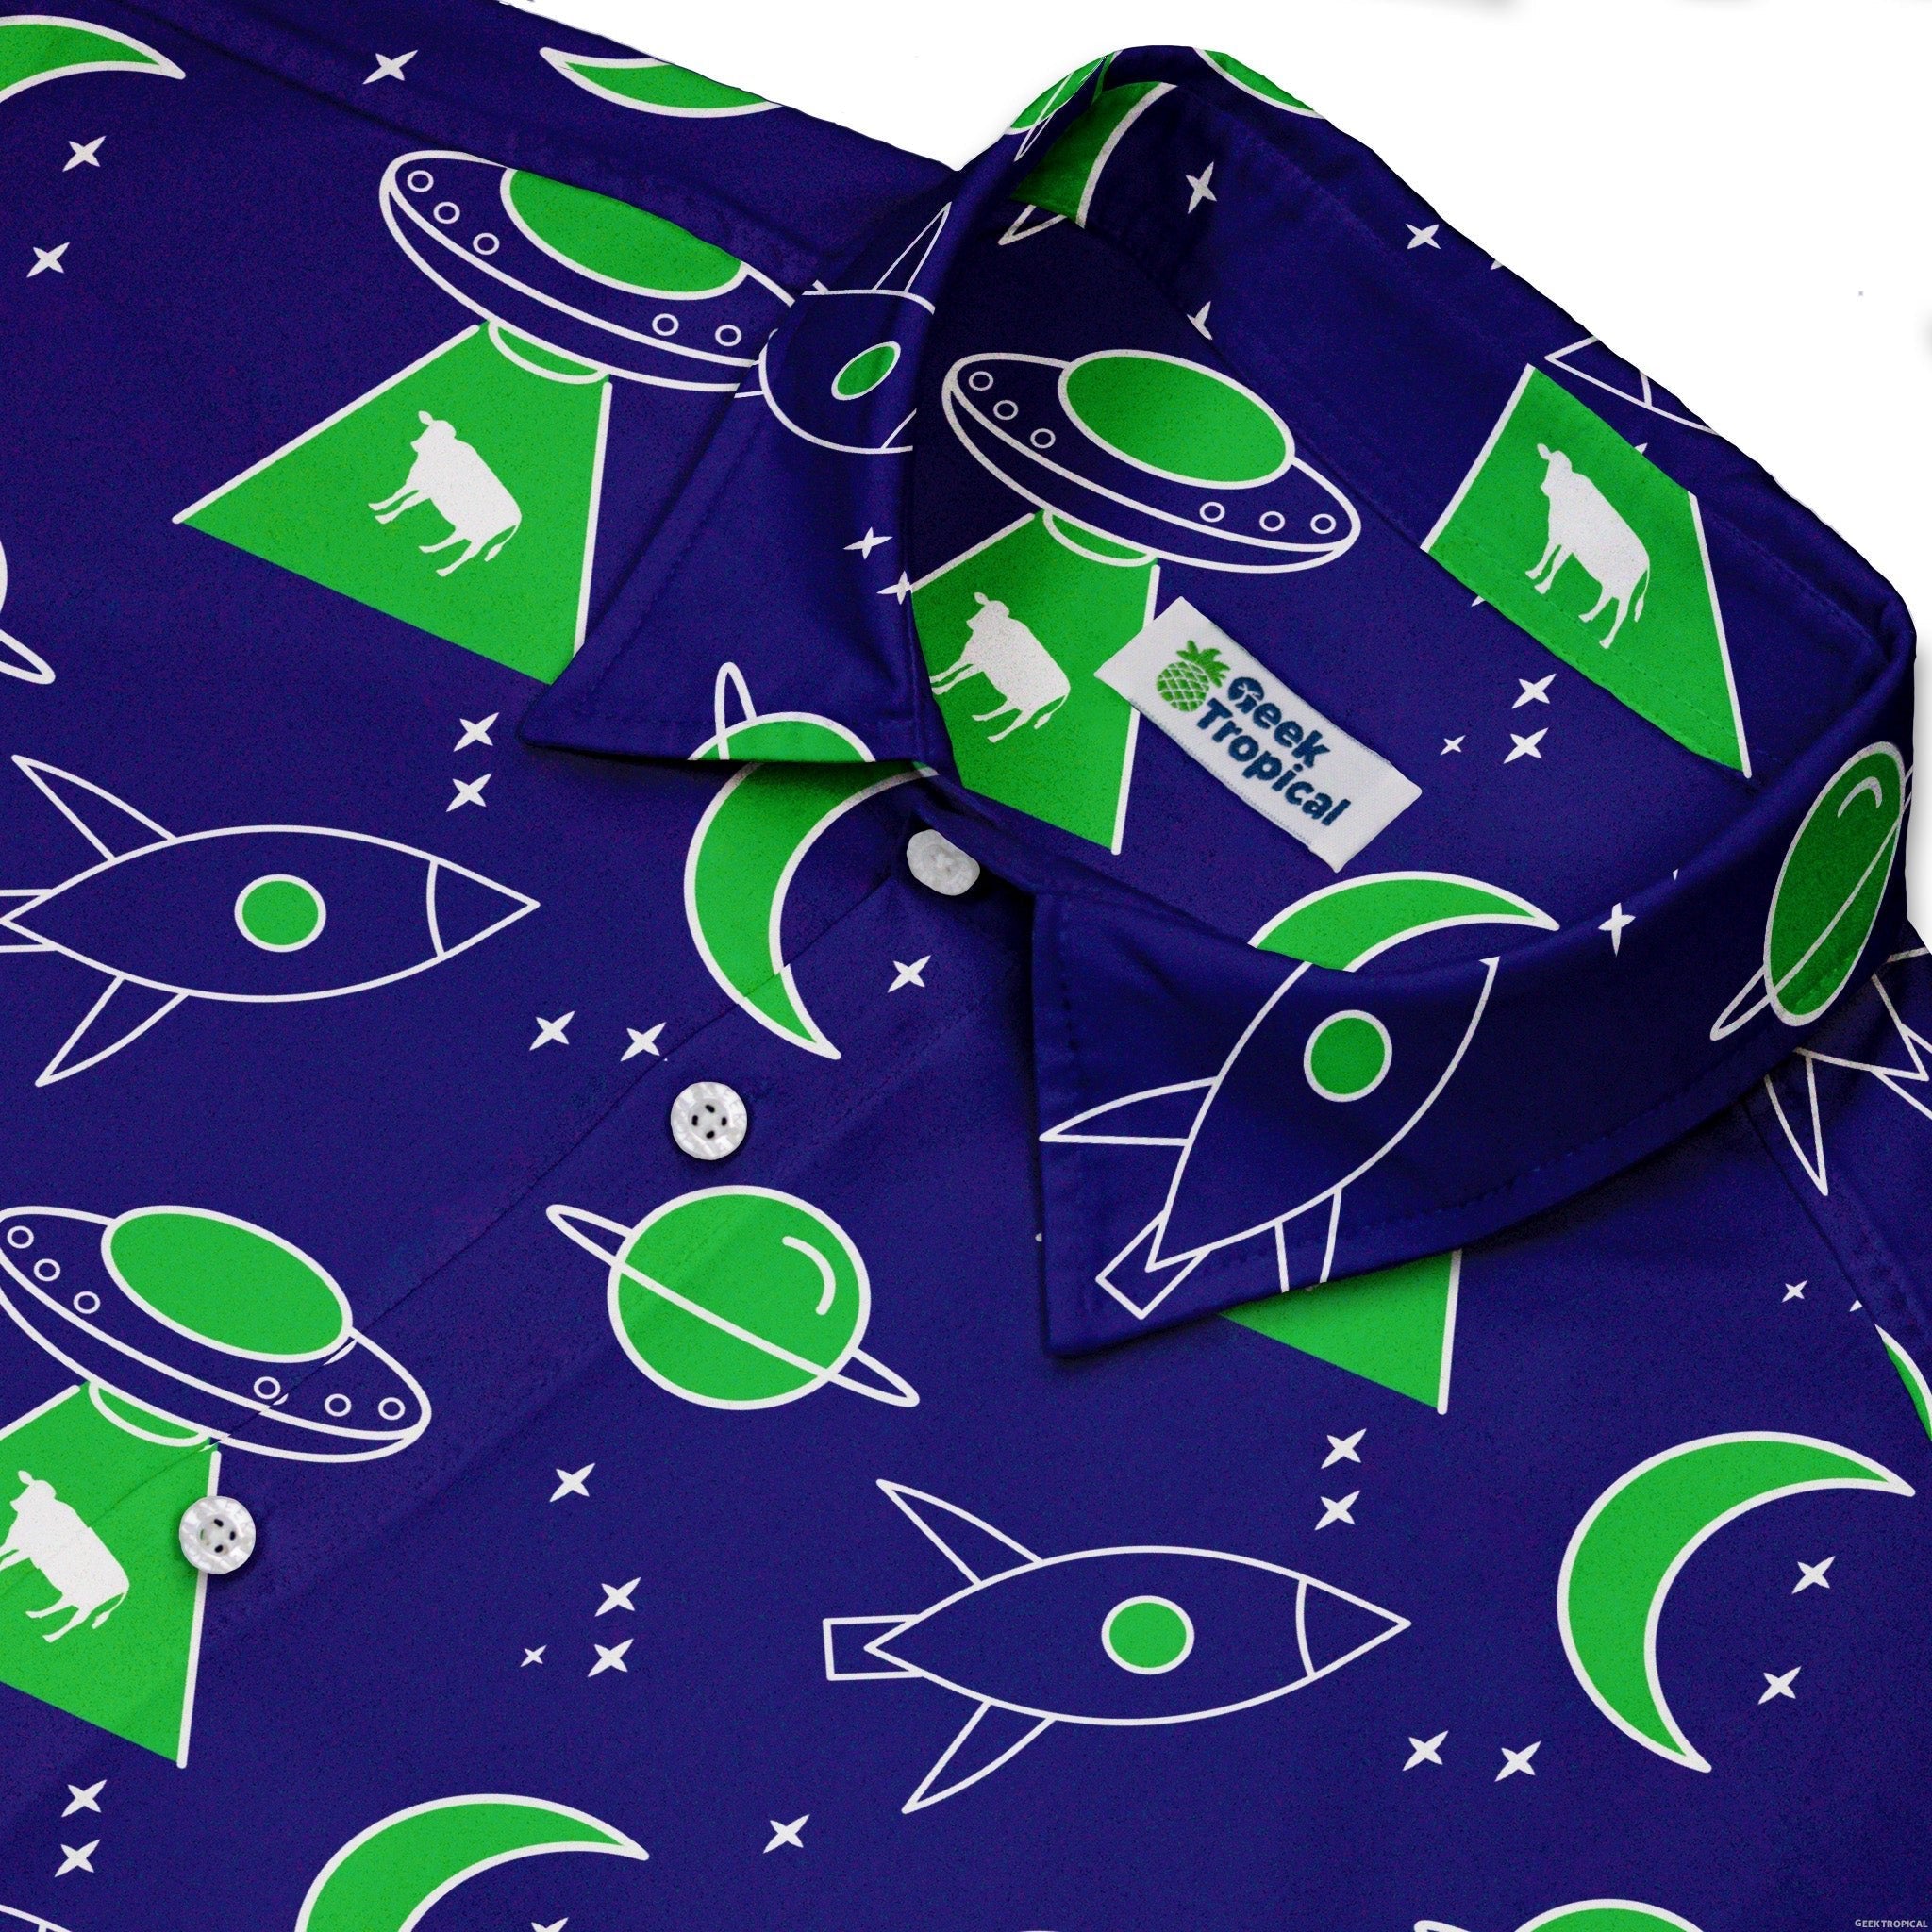 UFO Cow Abduction Button Up Shirt - adult sizing - Animal Patterns - Design by Heather Davenport